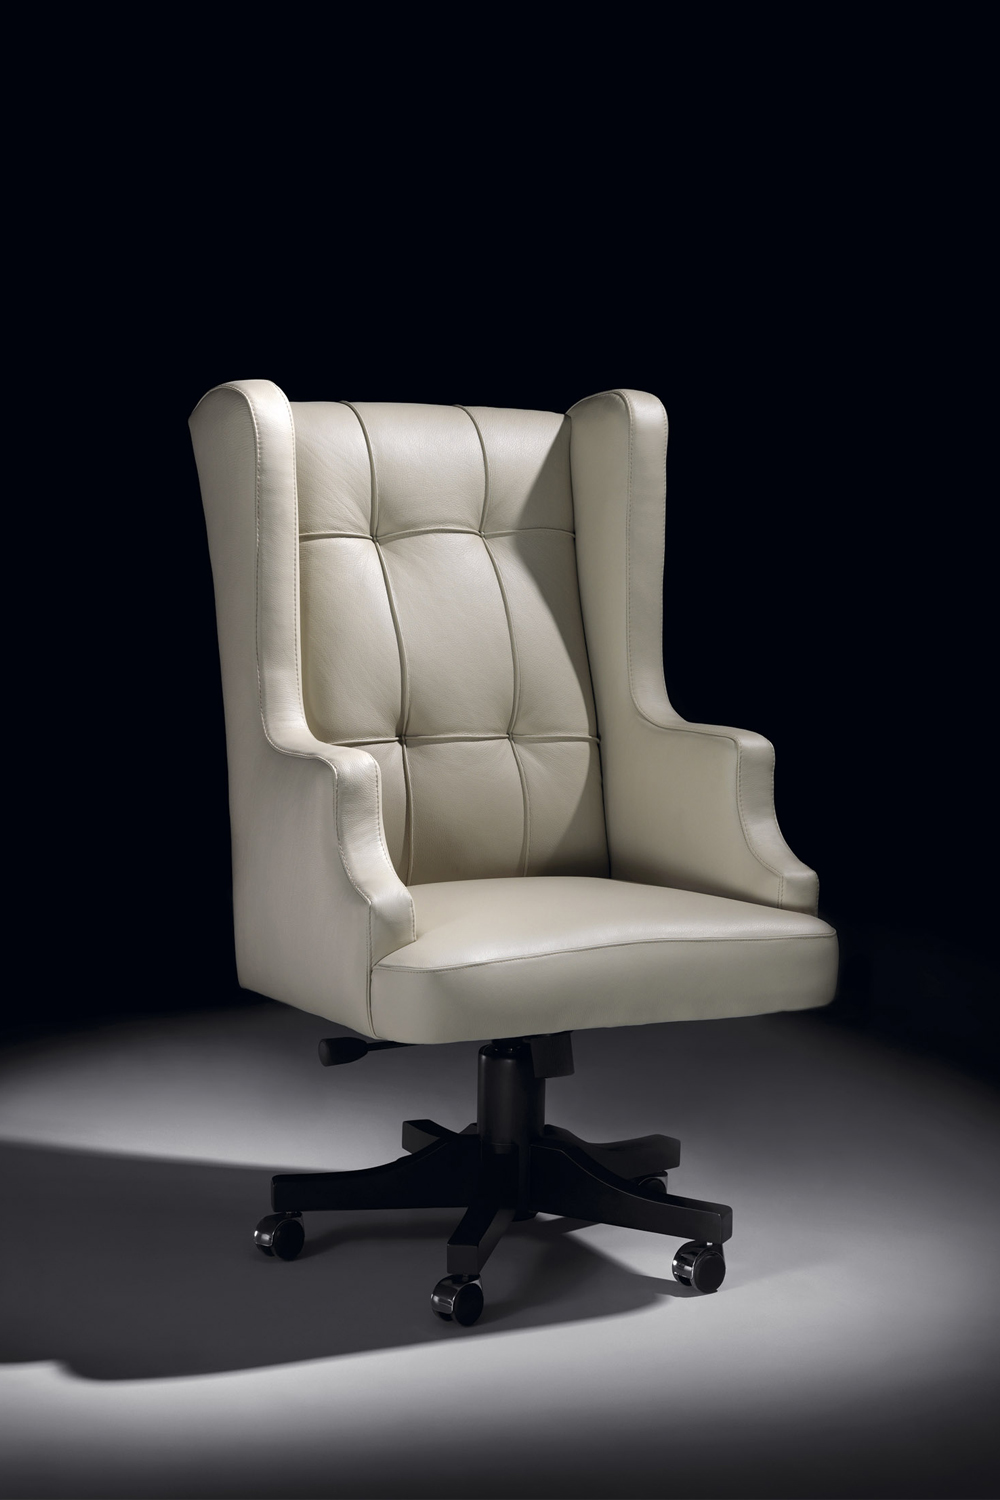 home office chairs uk, luxury office chair, leather office chair